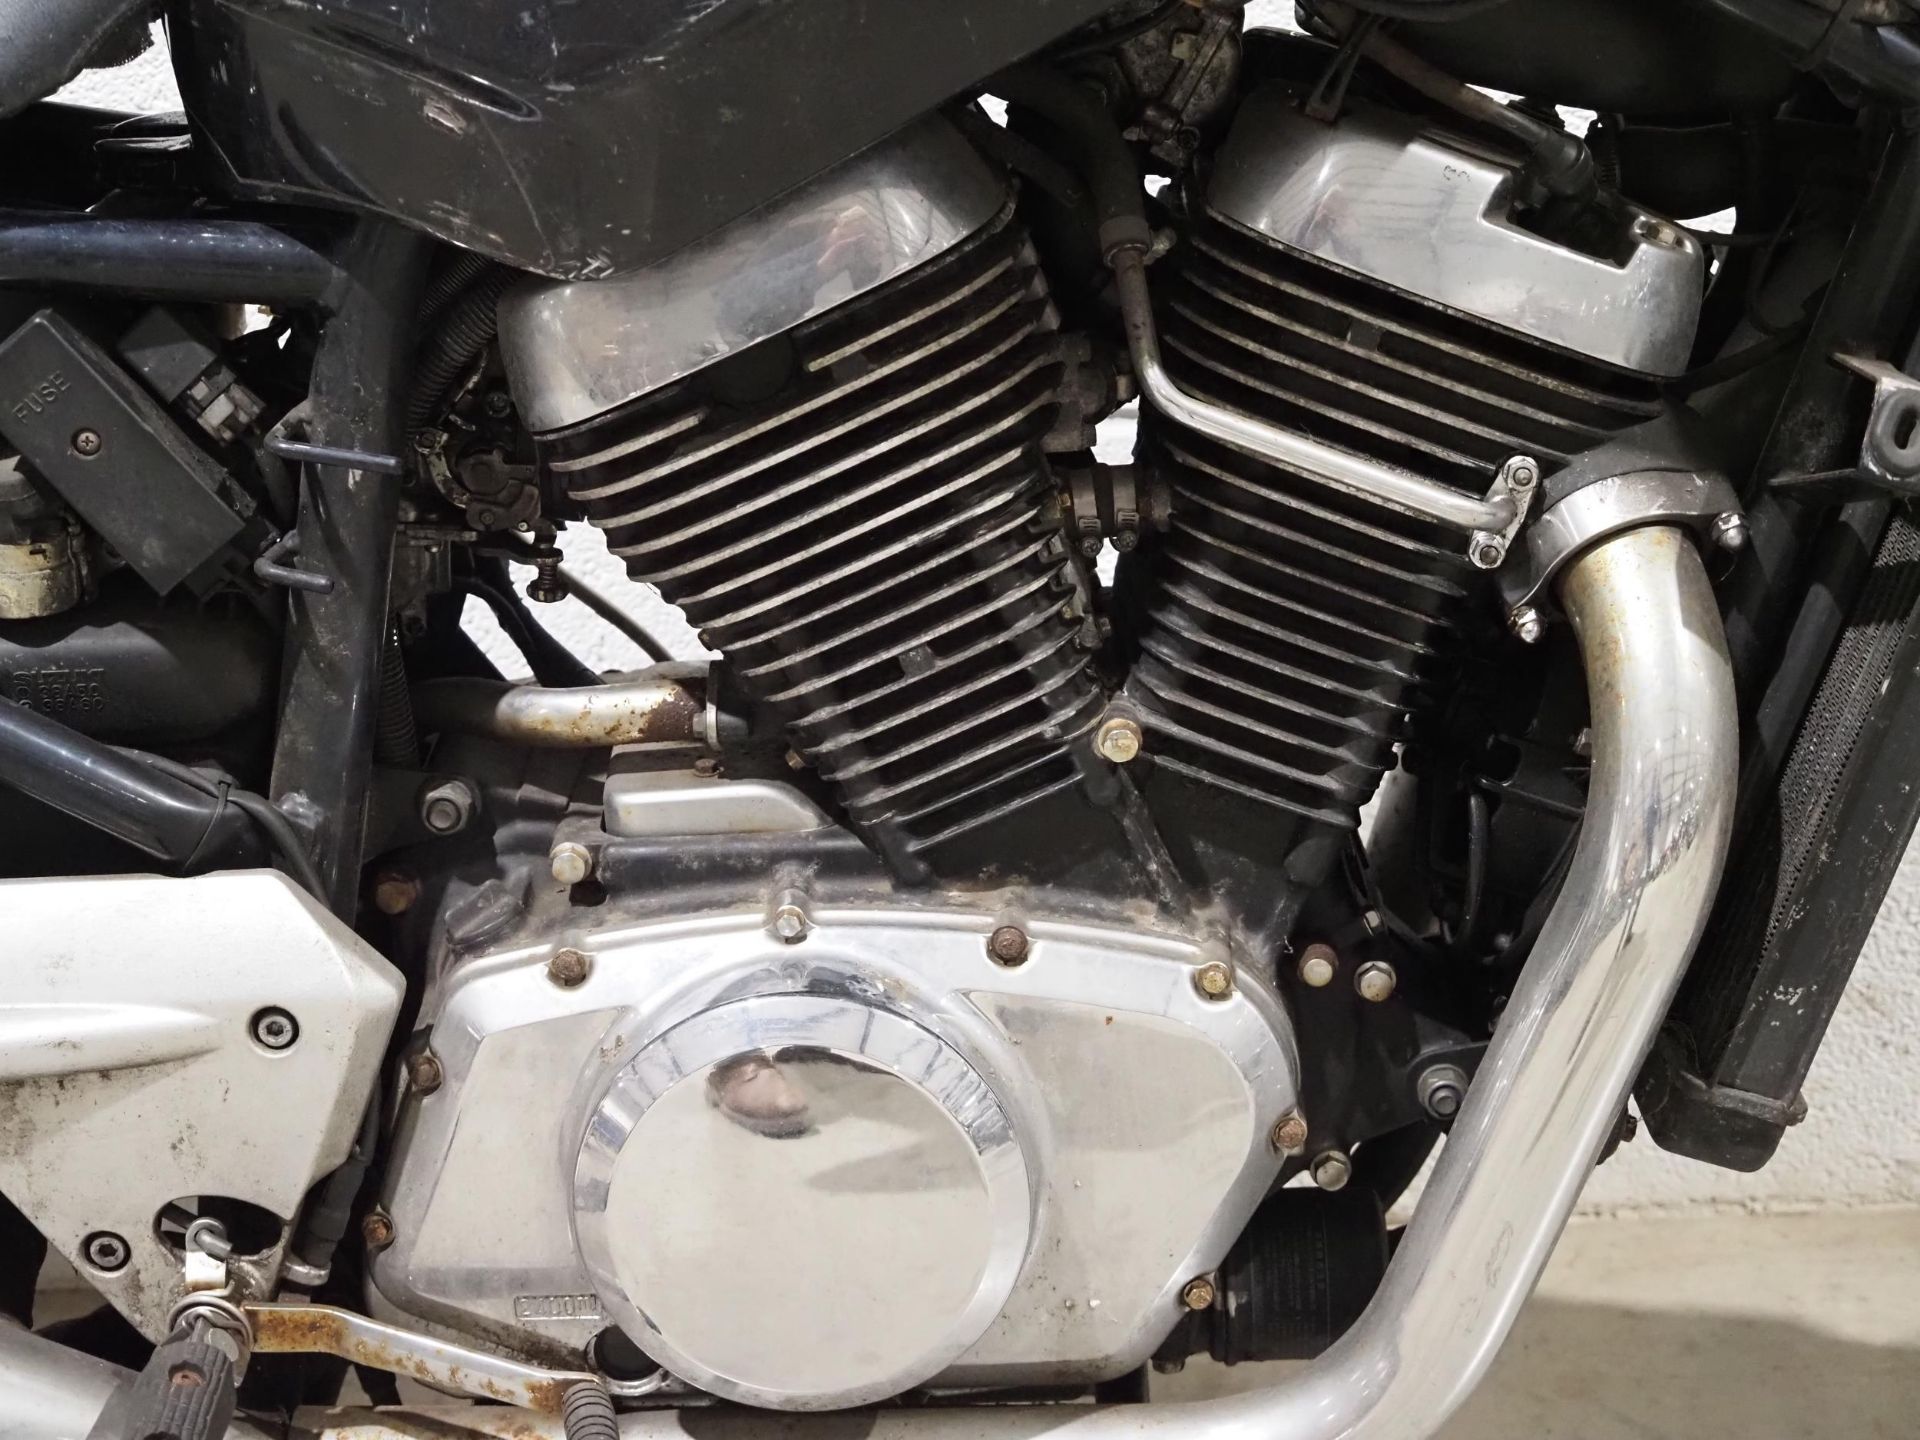 Sachs Roadster 800 motorcycle project. Engine turns over with compression. No docs. - Image 4 of 6